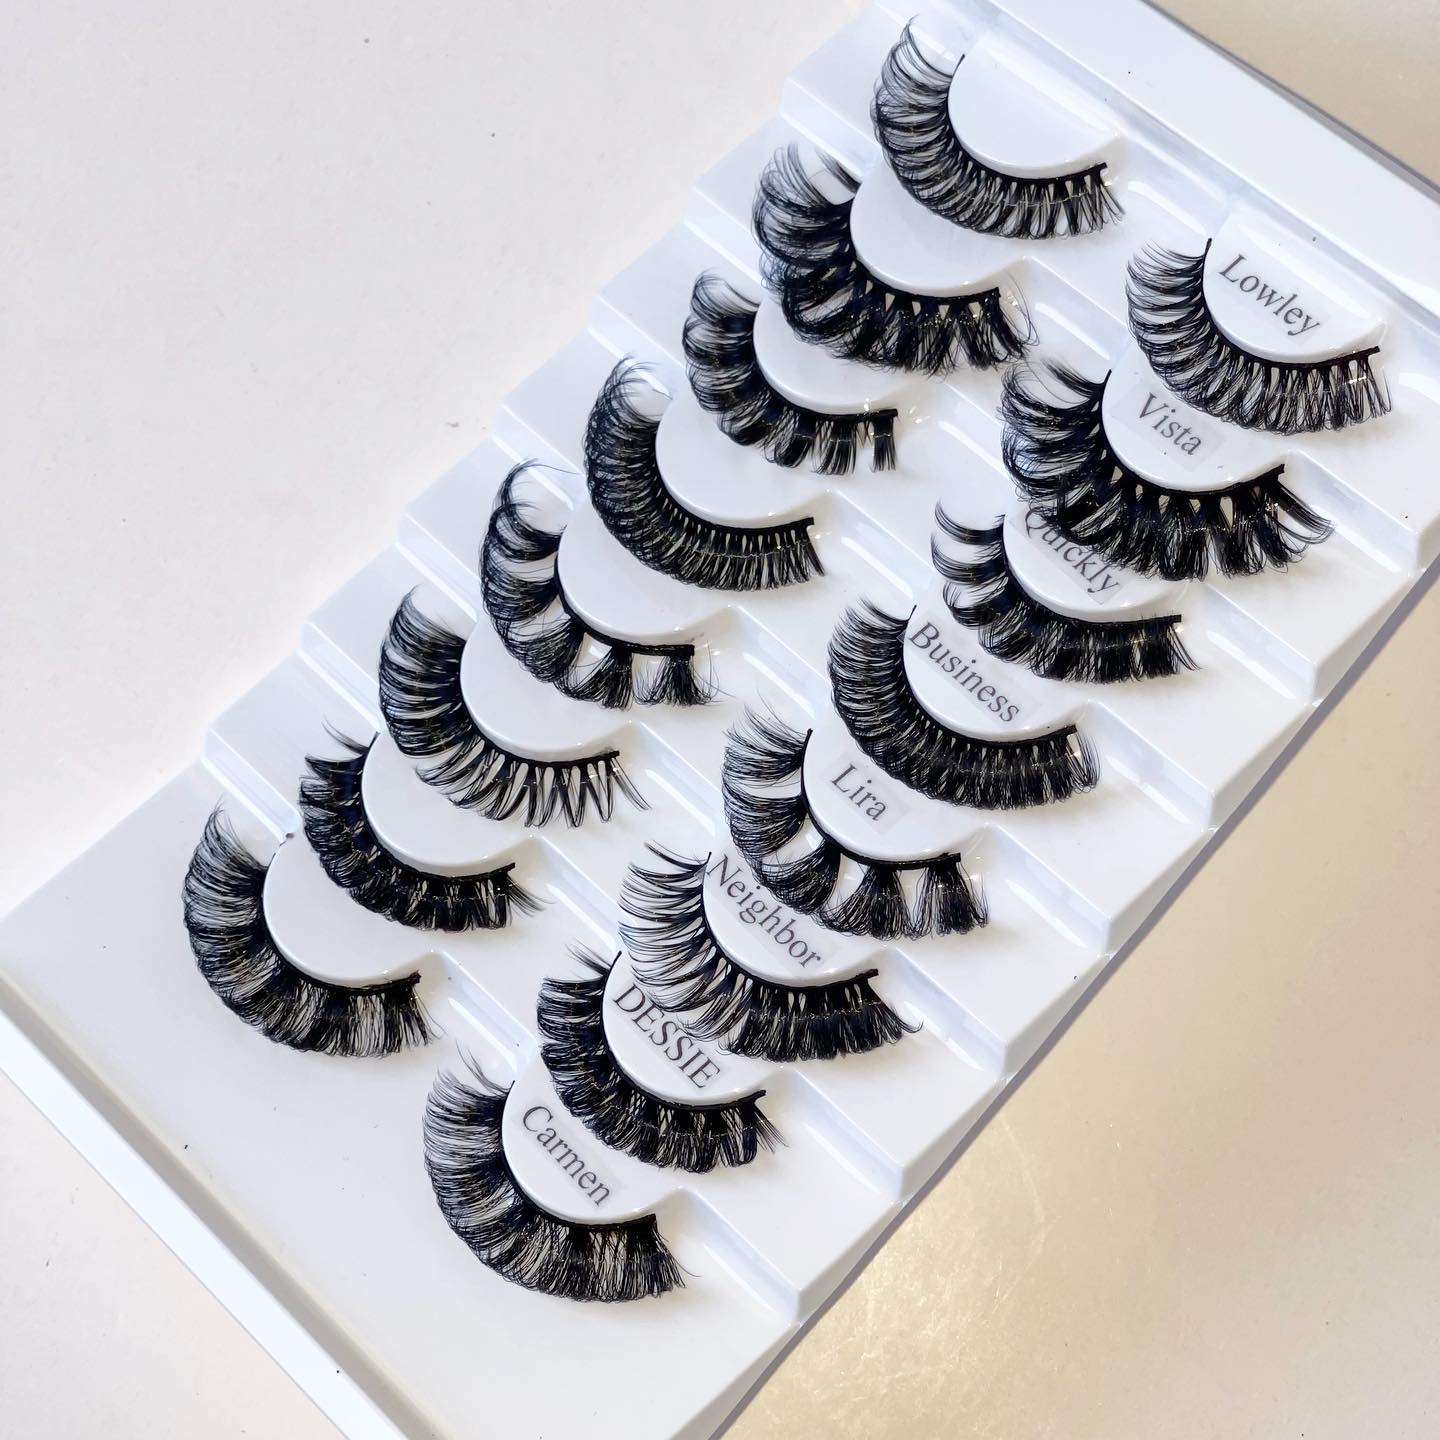 8 PACK 15MM RUSSIAN LASHES